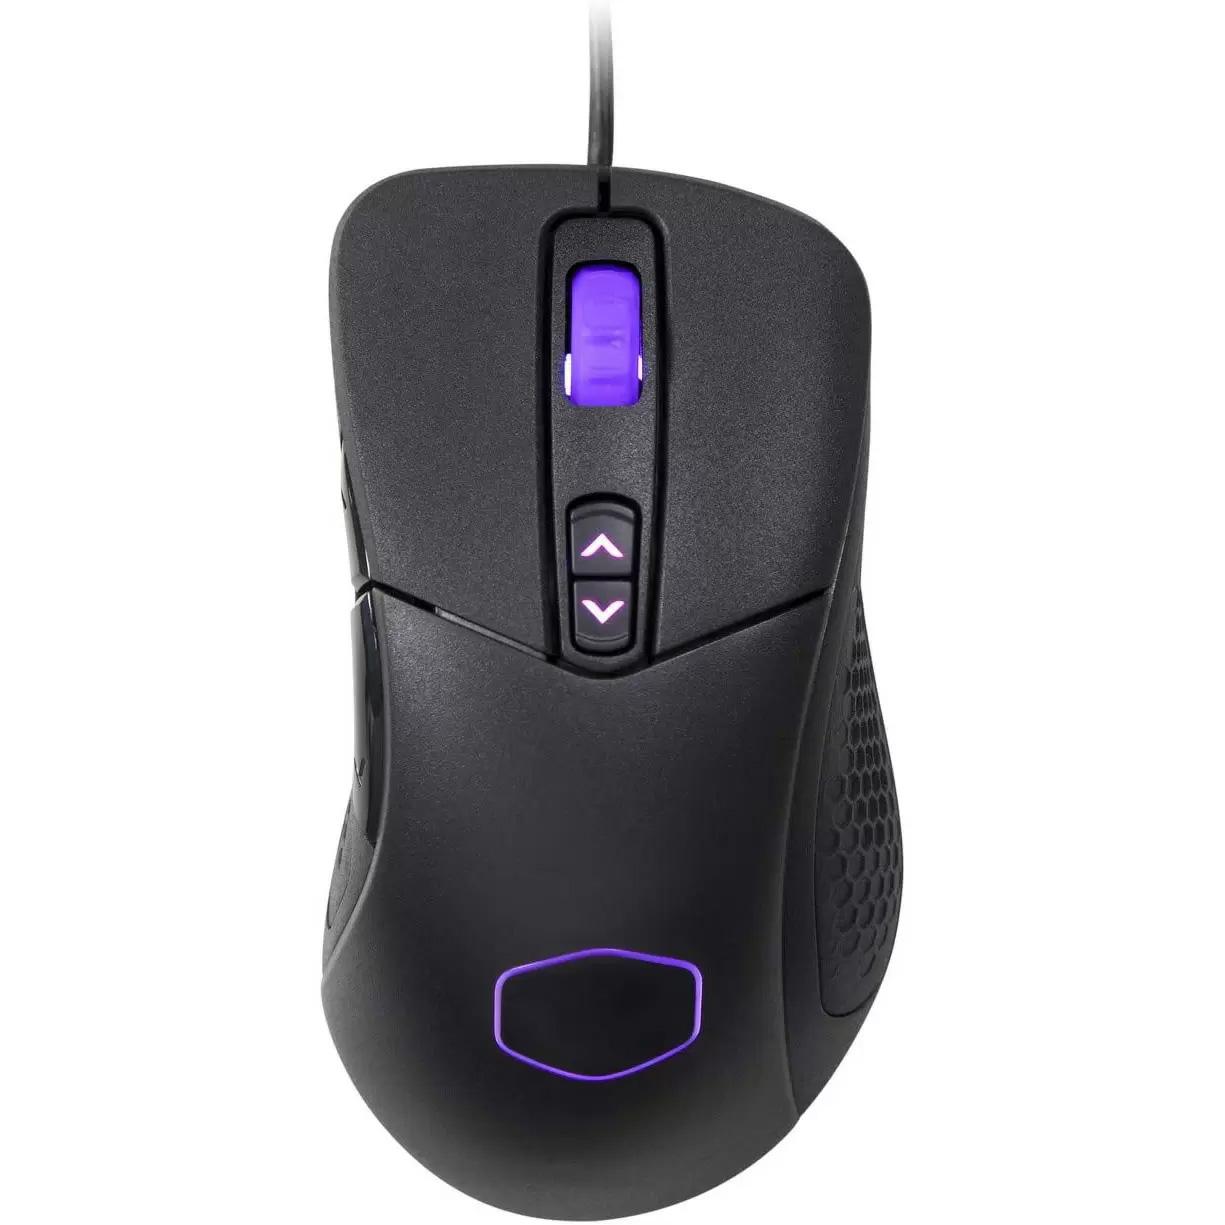 Cooler Master MM531 Wired Gaming Mouse for $10.44